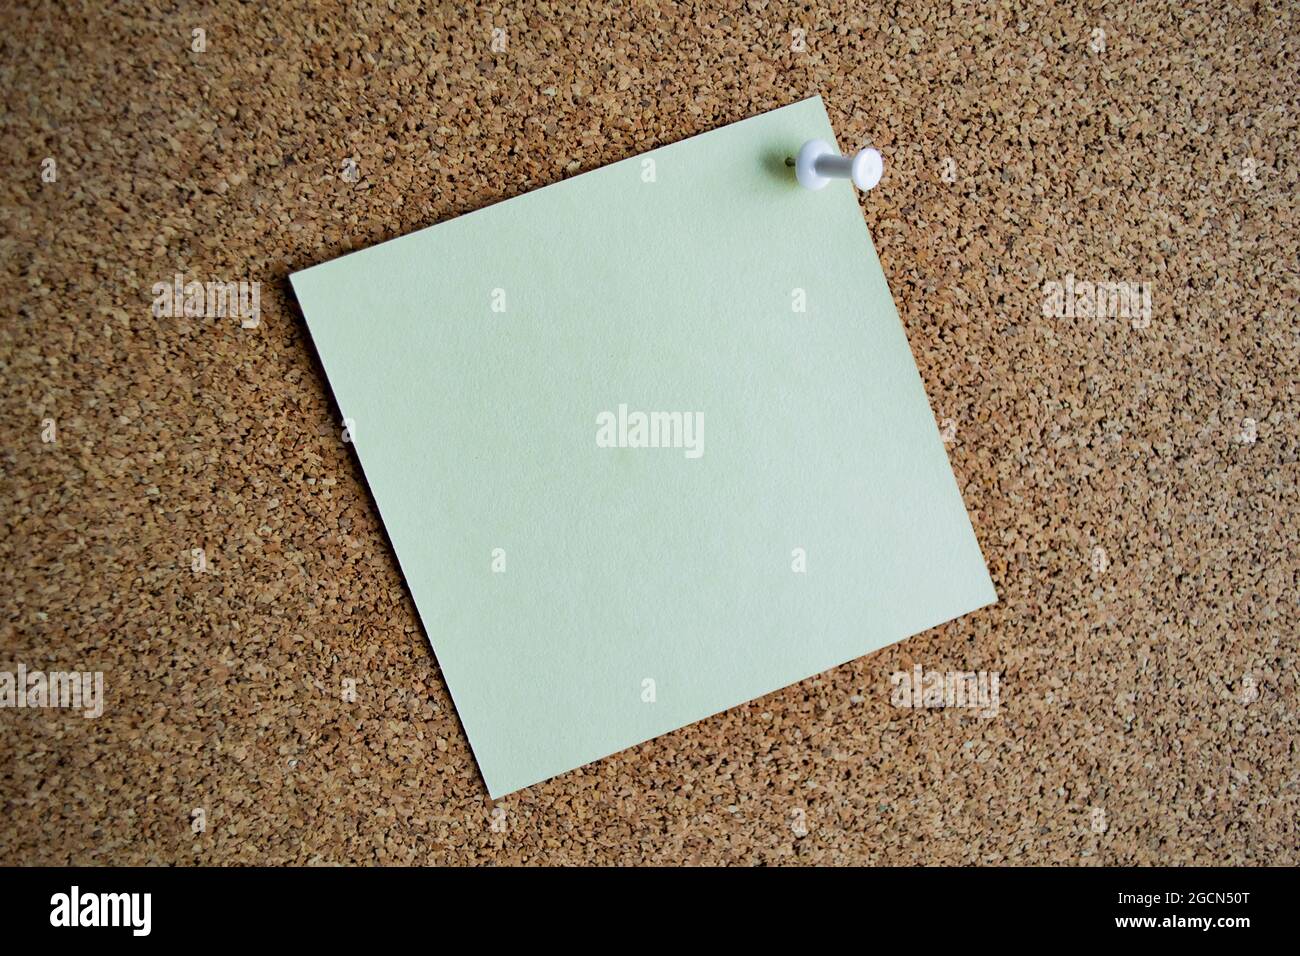 A light green paper note on a cork board, attached with a white pushpin. Copy space. Stock Photo